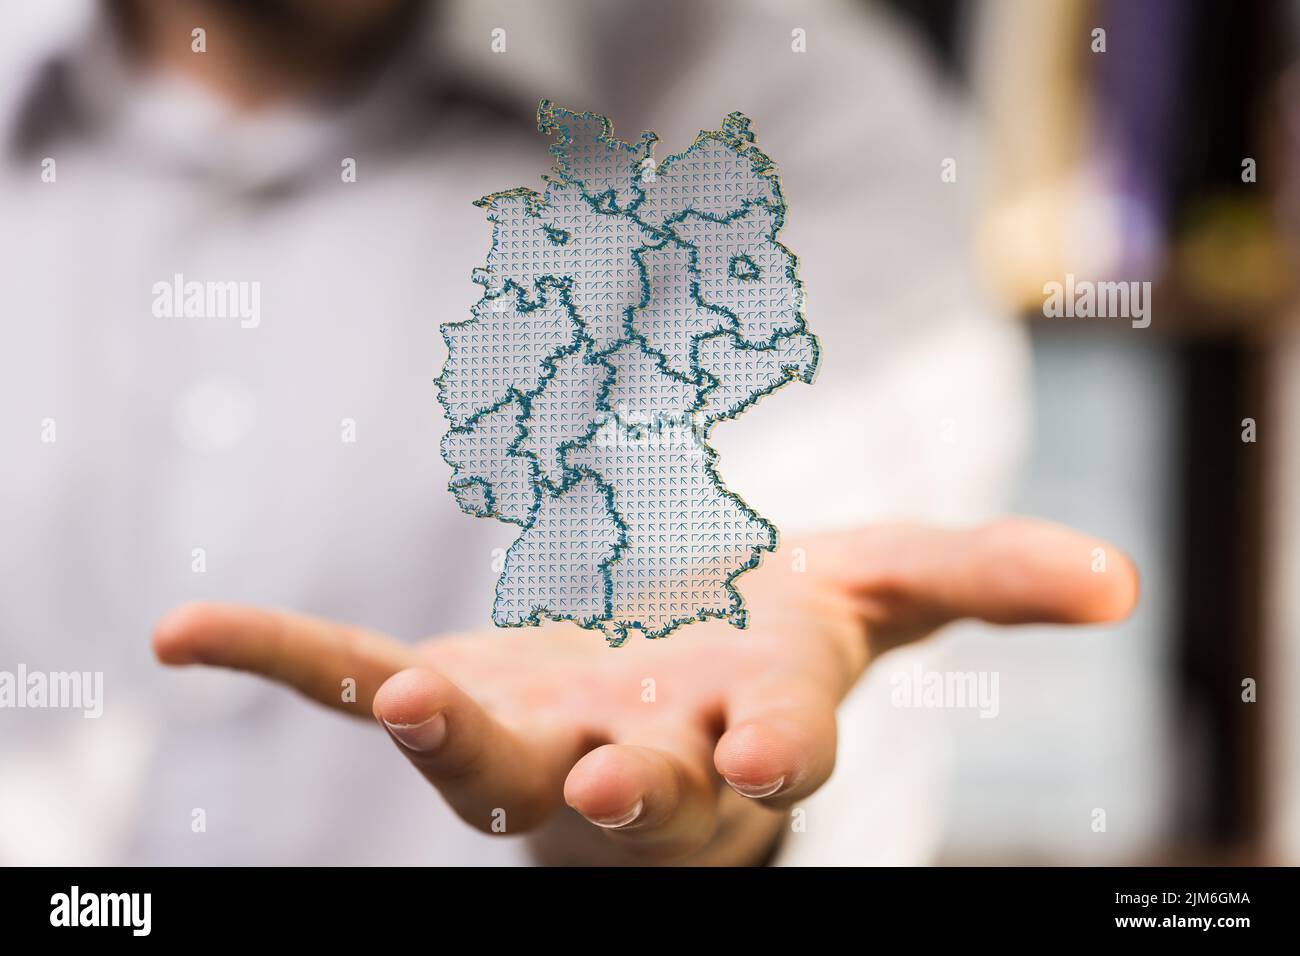 A 3D render of a German map on a male hand with blurred background Stock Photo